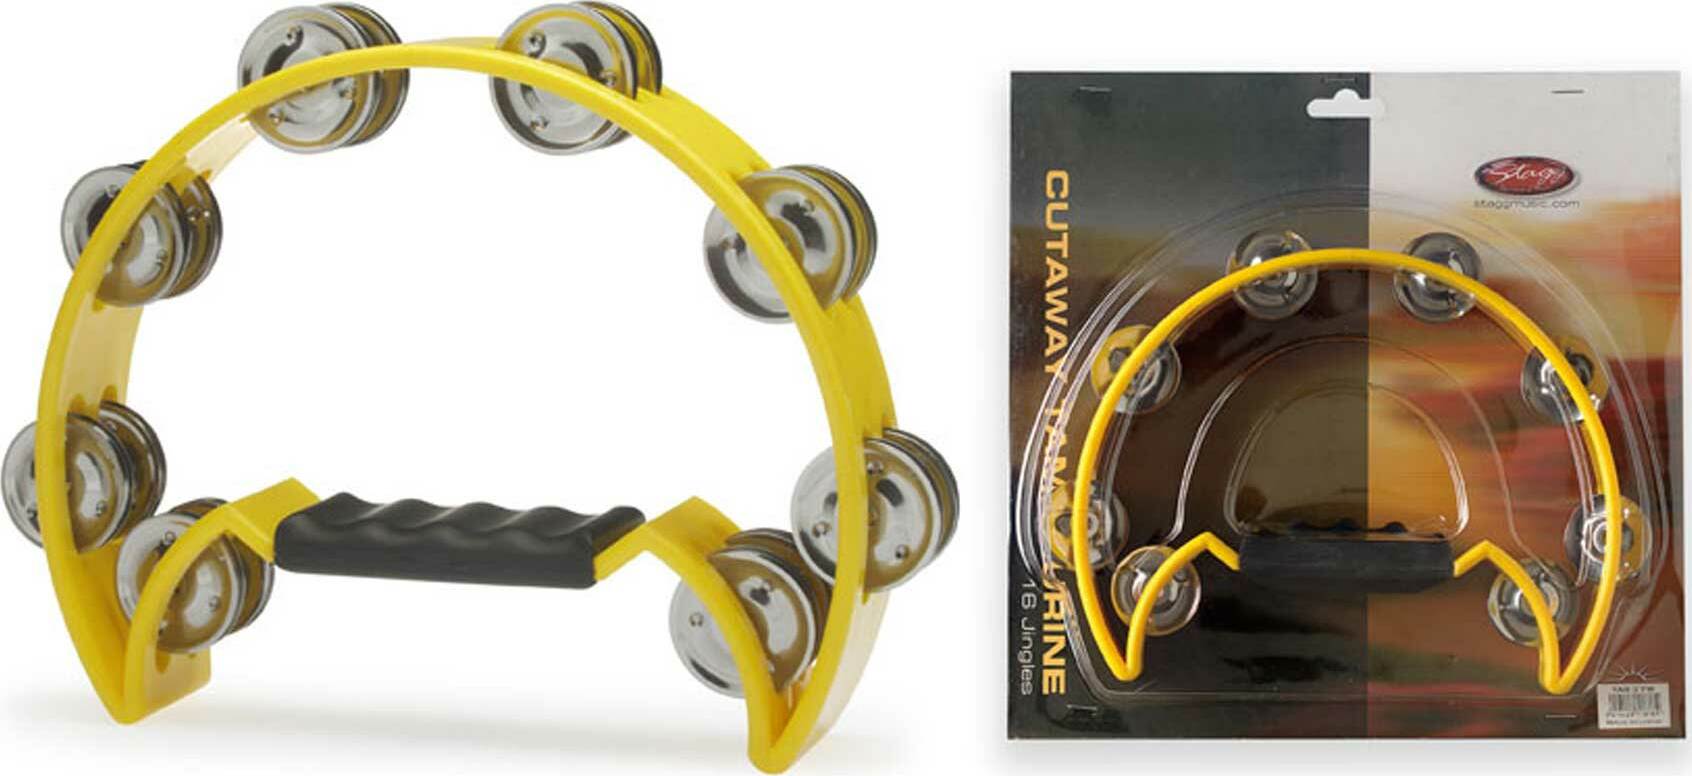 Stagg Tab-1 Yw Tambourin En Plastique Avec 20 Cymbalettes Yellow - Shake percussion - Main picture